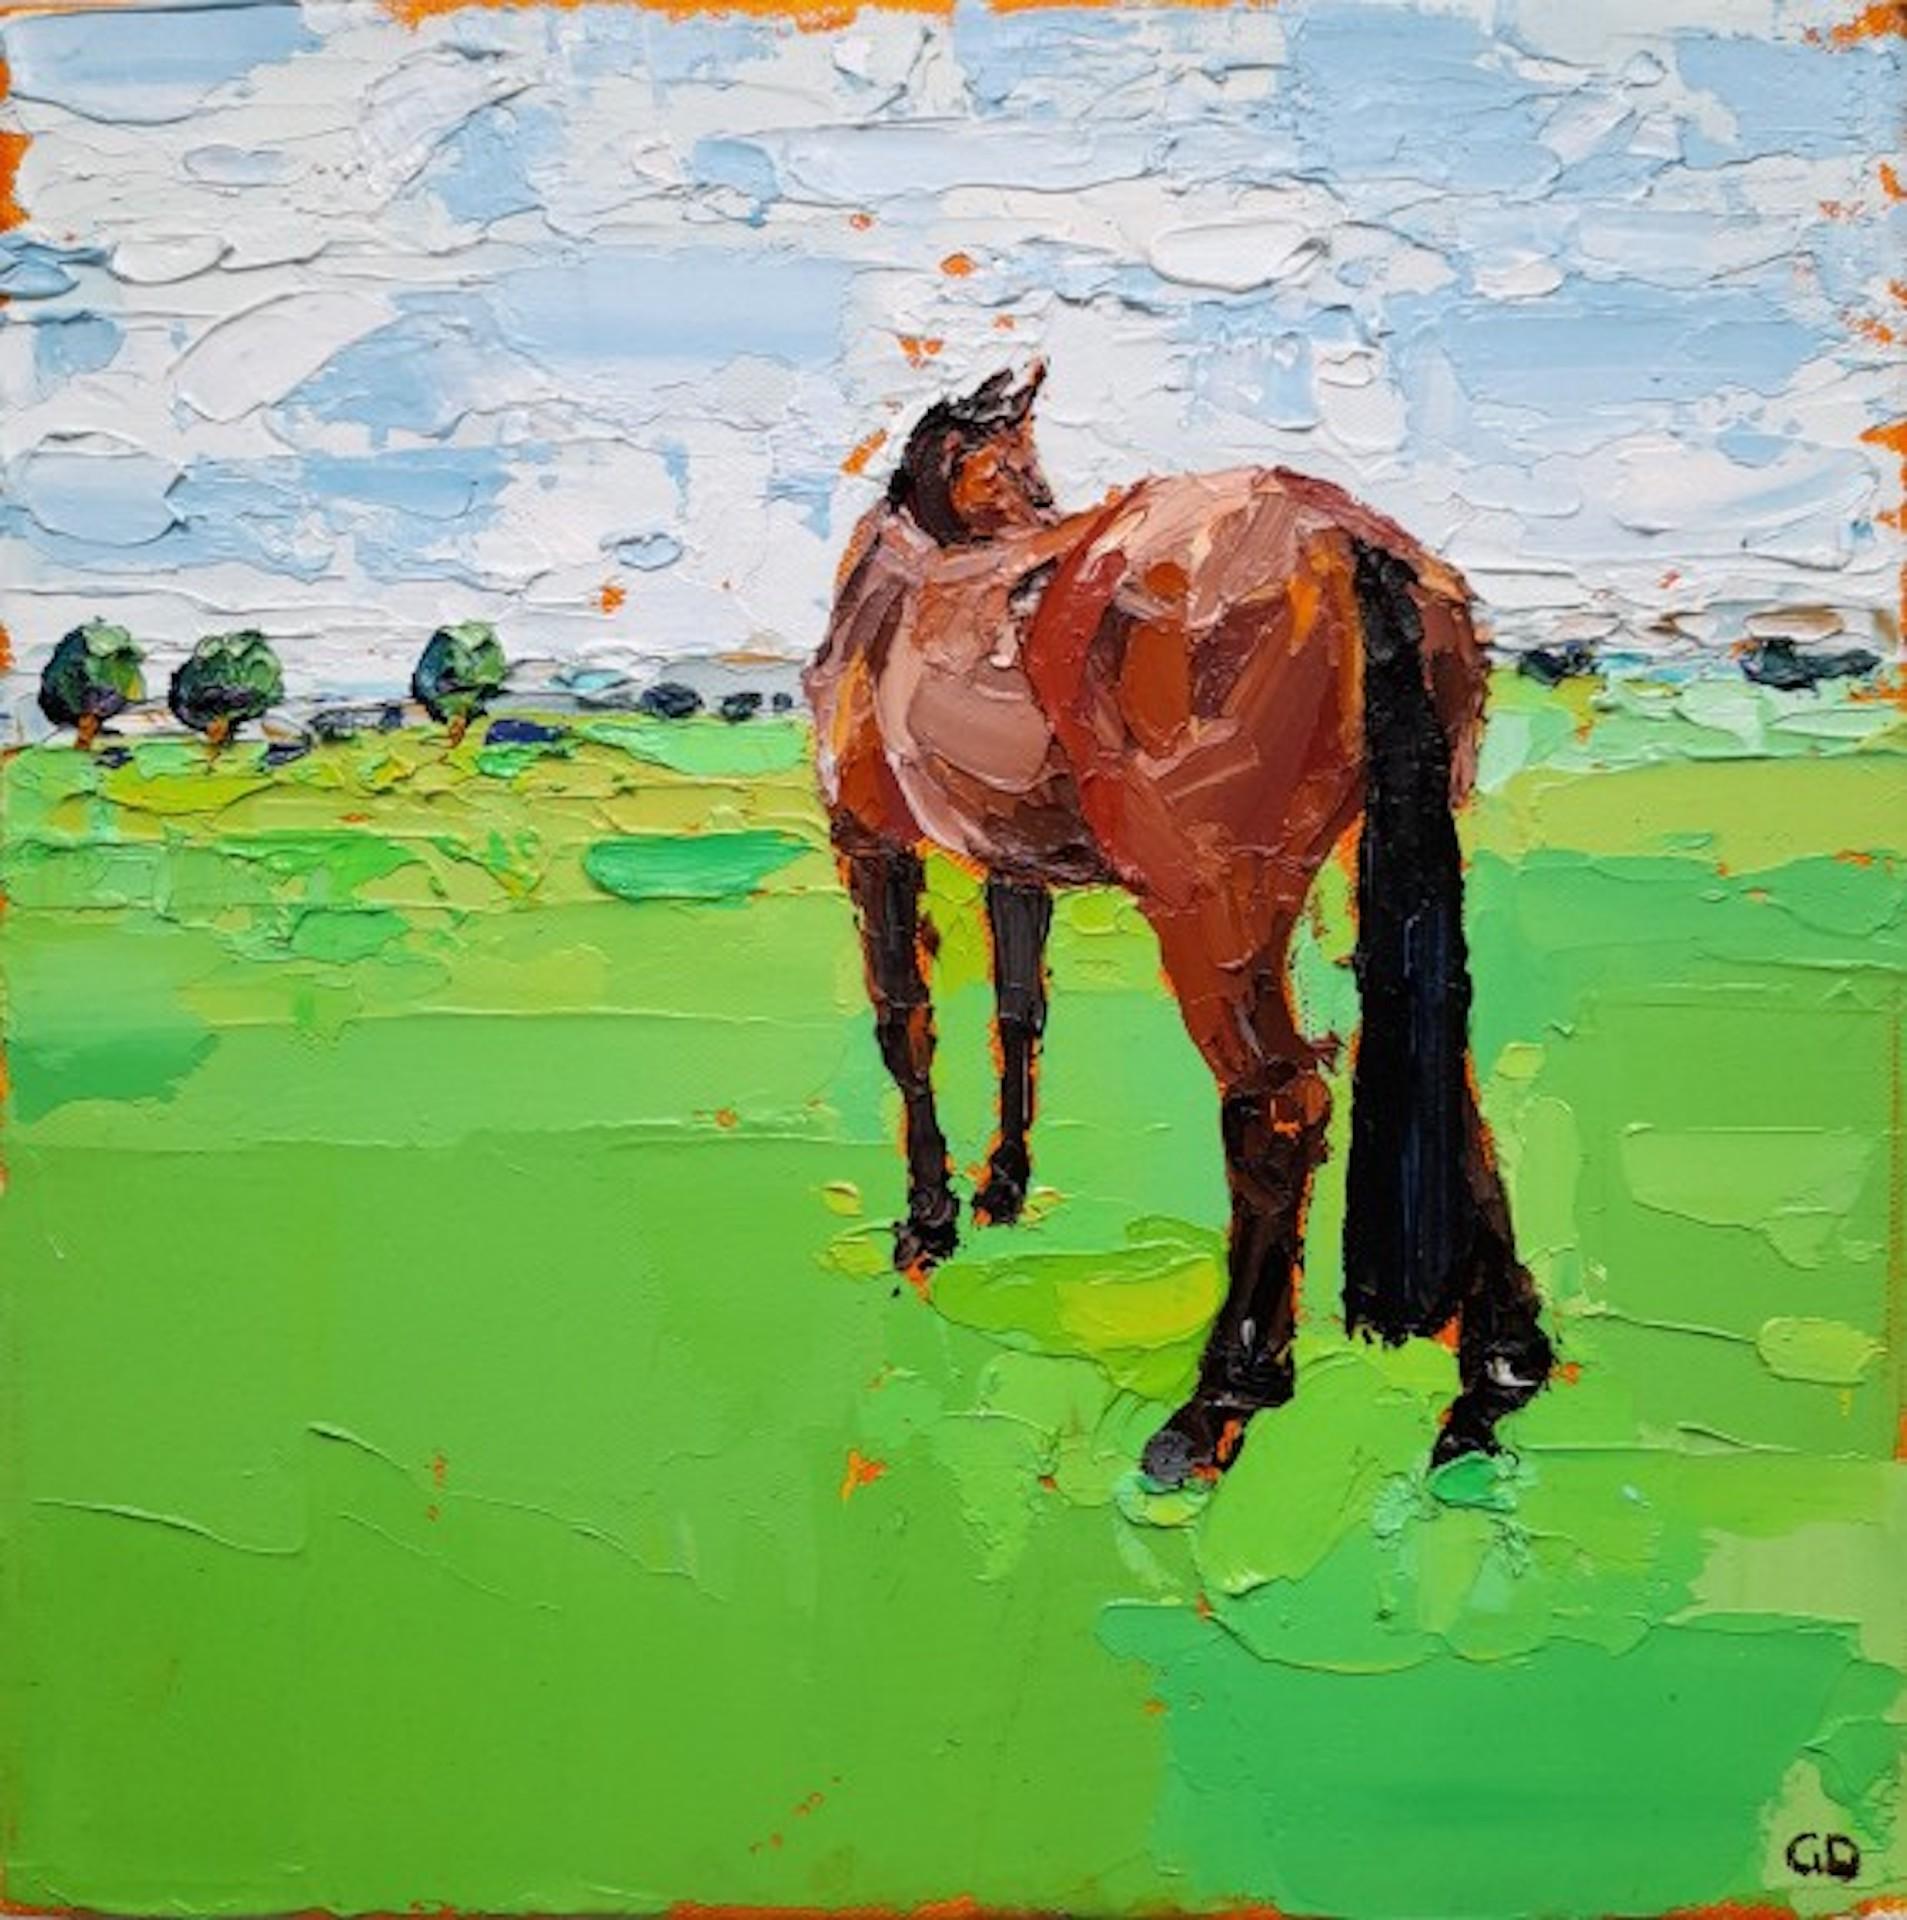 Gazing Horse [2020]
Original
Landscapes and seascapes
Oil paint on canvas
Image size: H:30 cm x W:30 cm
Complete Size of Unframed Work: H:30 cm x W:30 cm x D:2cm
Sold Unframed
Please note that insitu images are purely an indication of how a piece